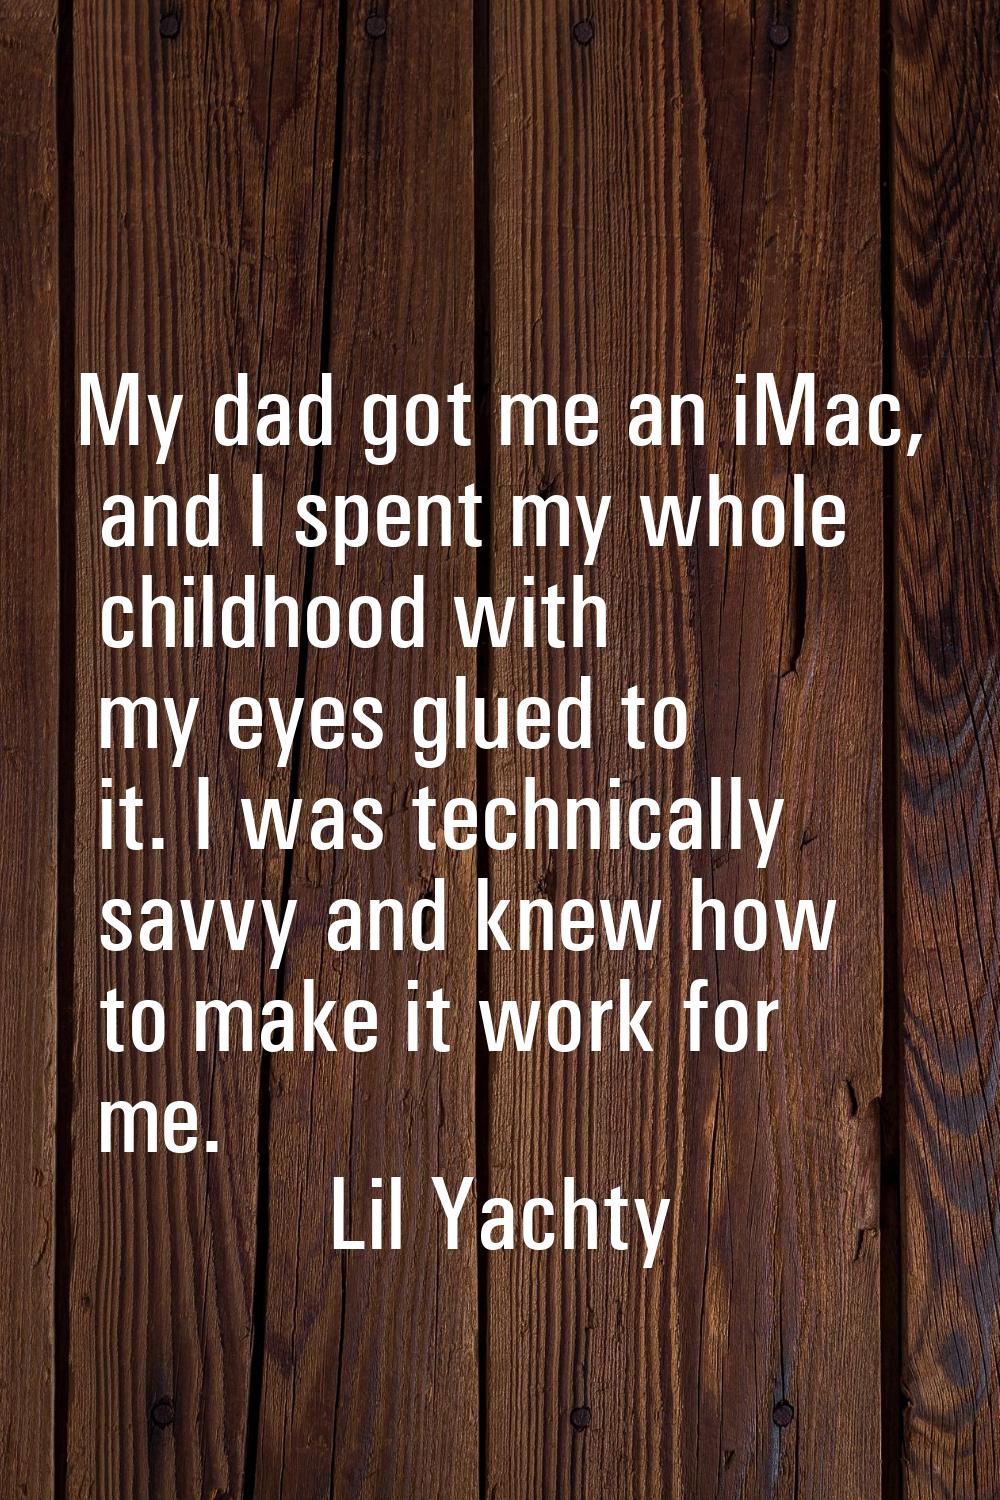 My dad got me an iMac, and I spent my whole childhood with my eyes glued to it. I was technically s